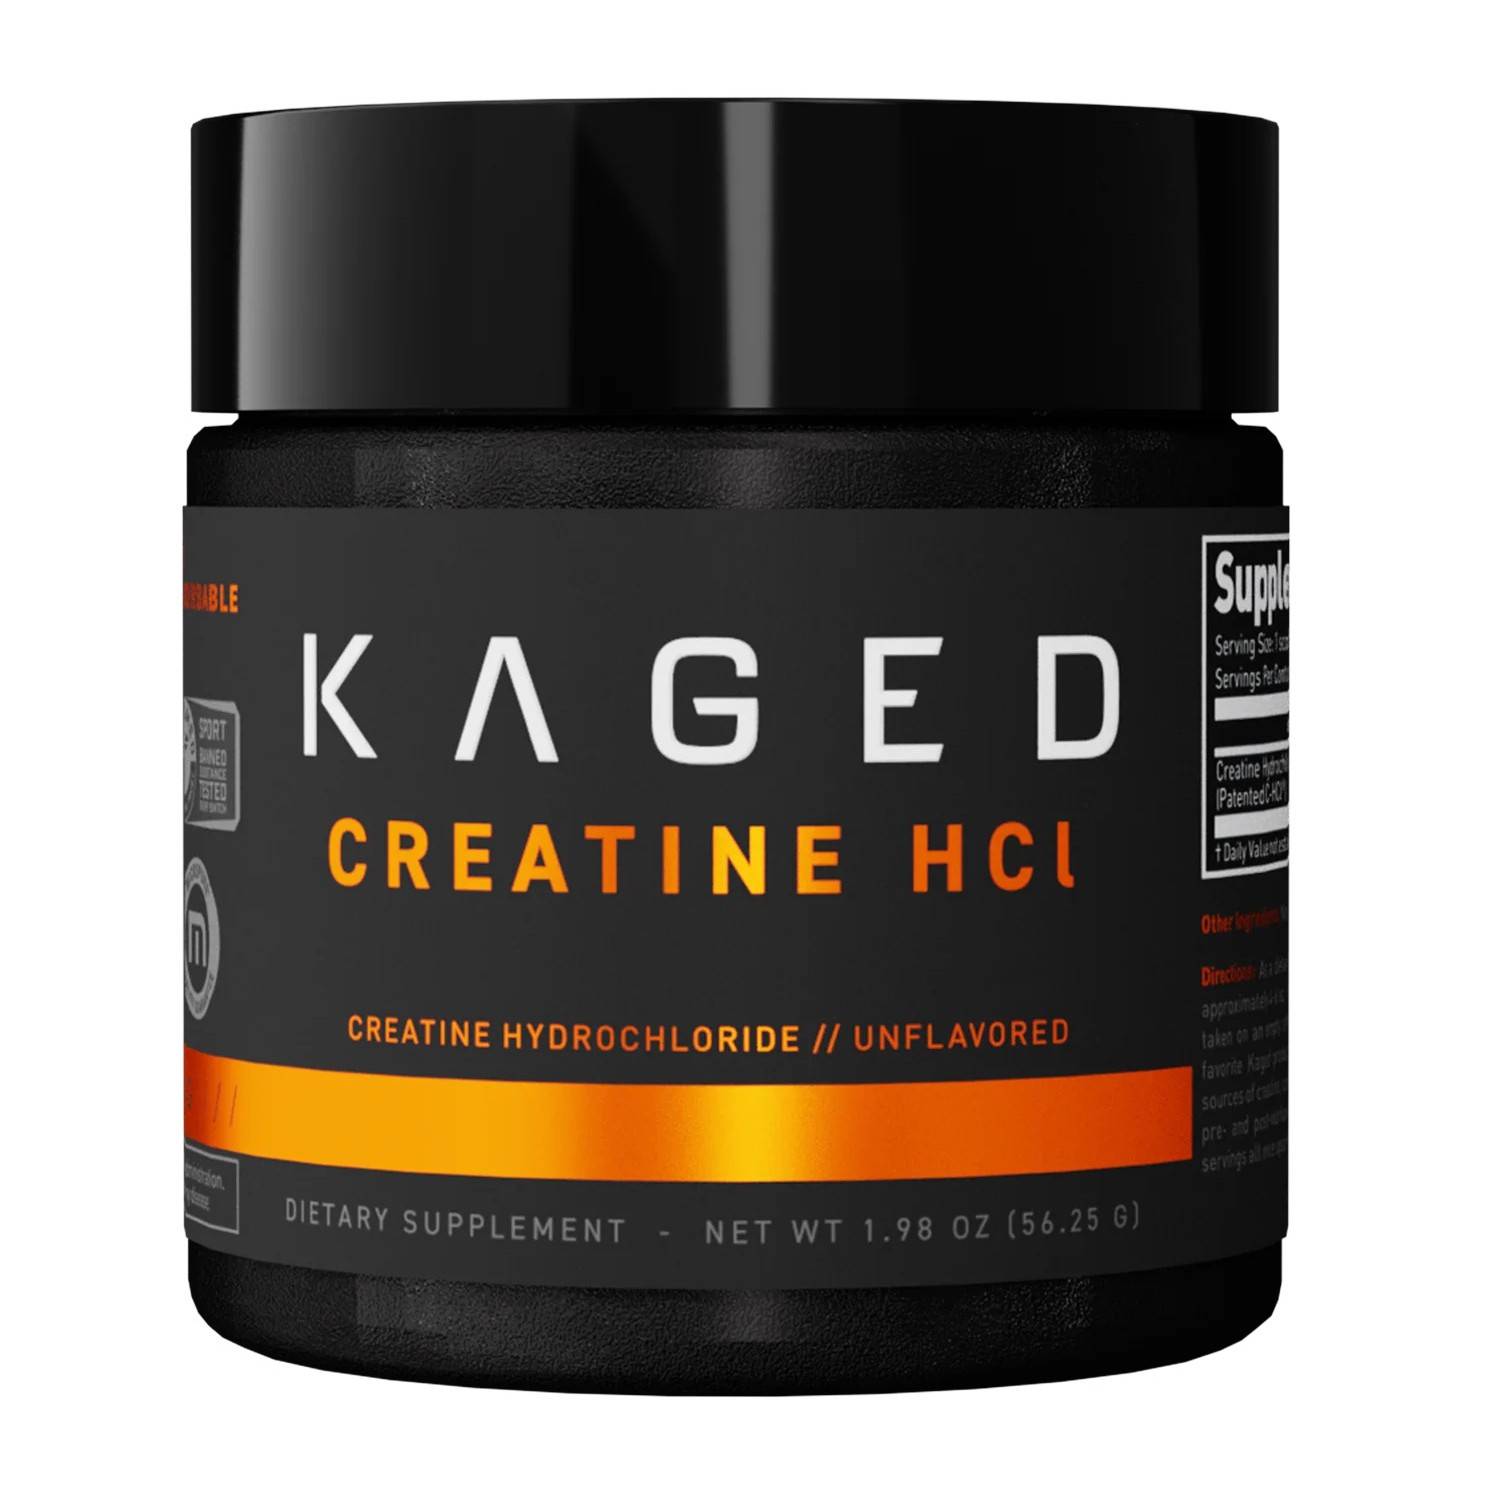 Kaged Muscle Creatine HCl